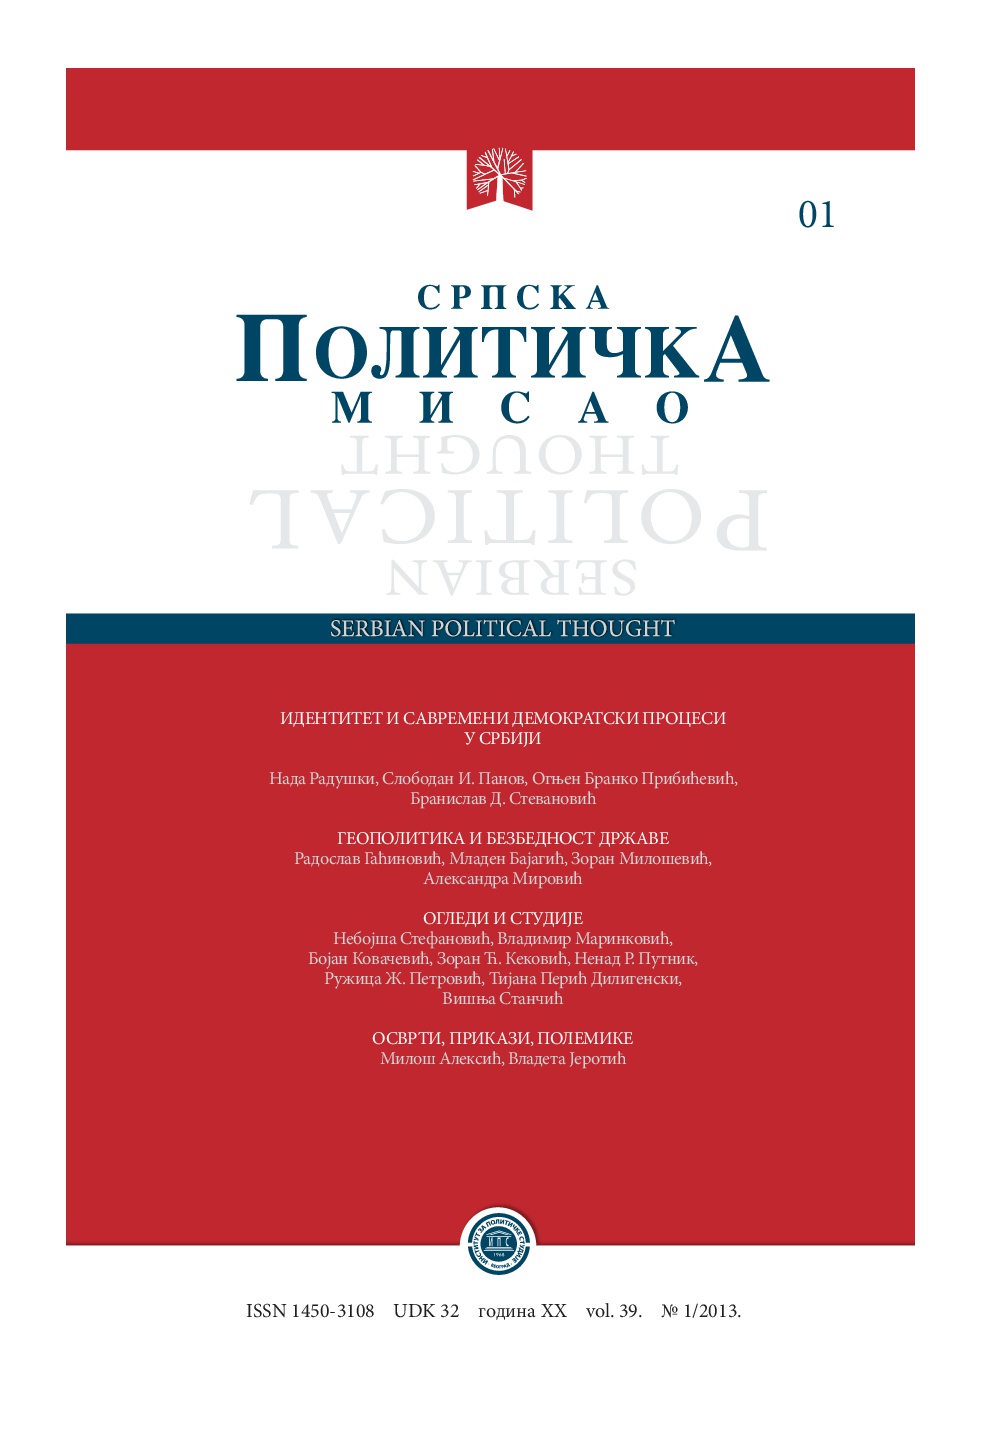 Difficult Transition in Serbia Cover Image